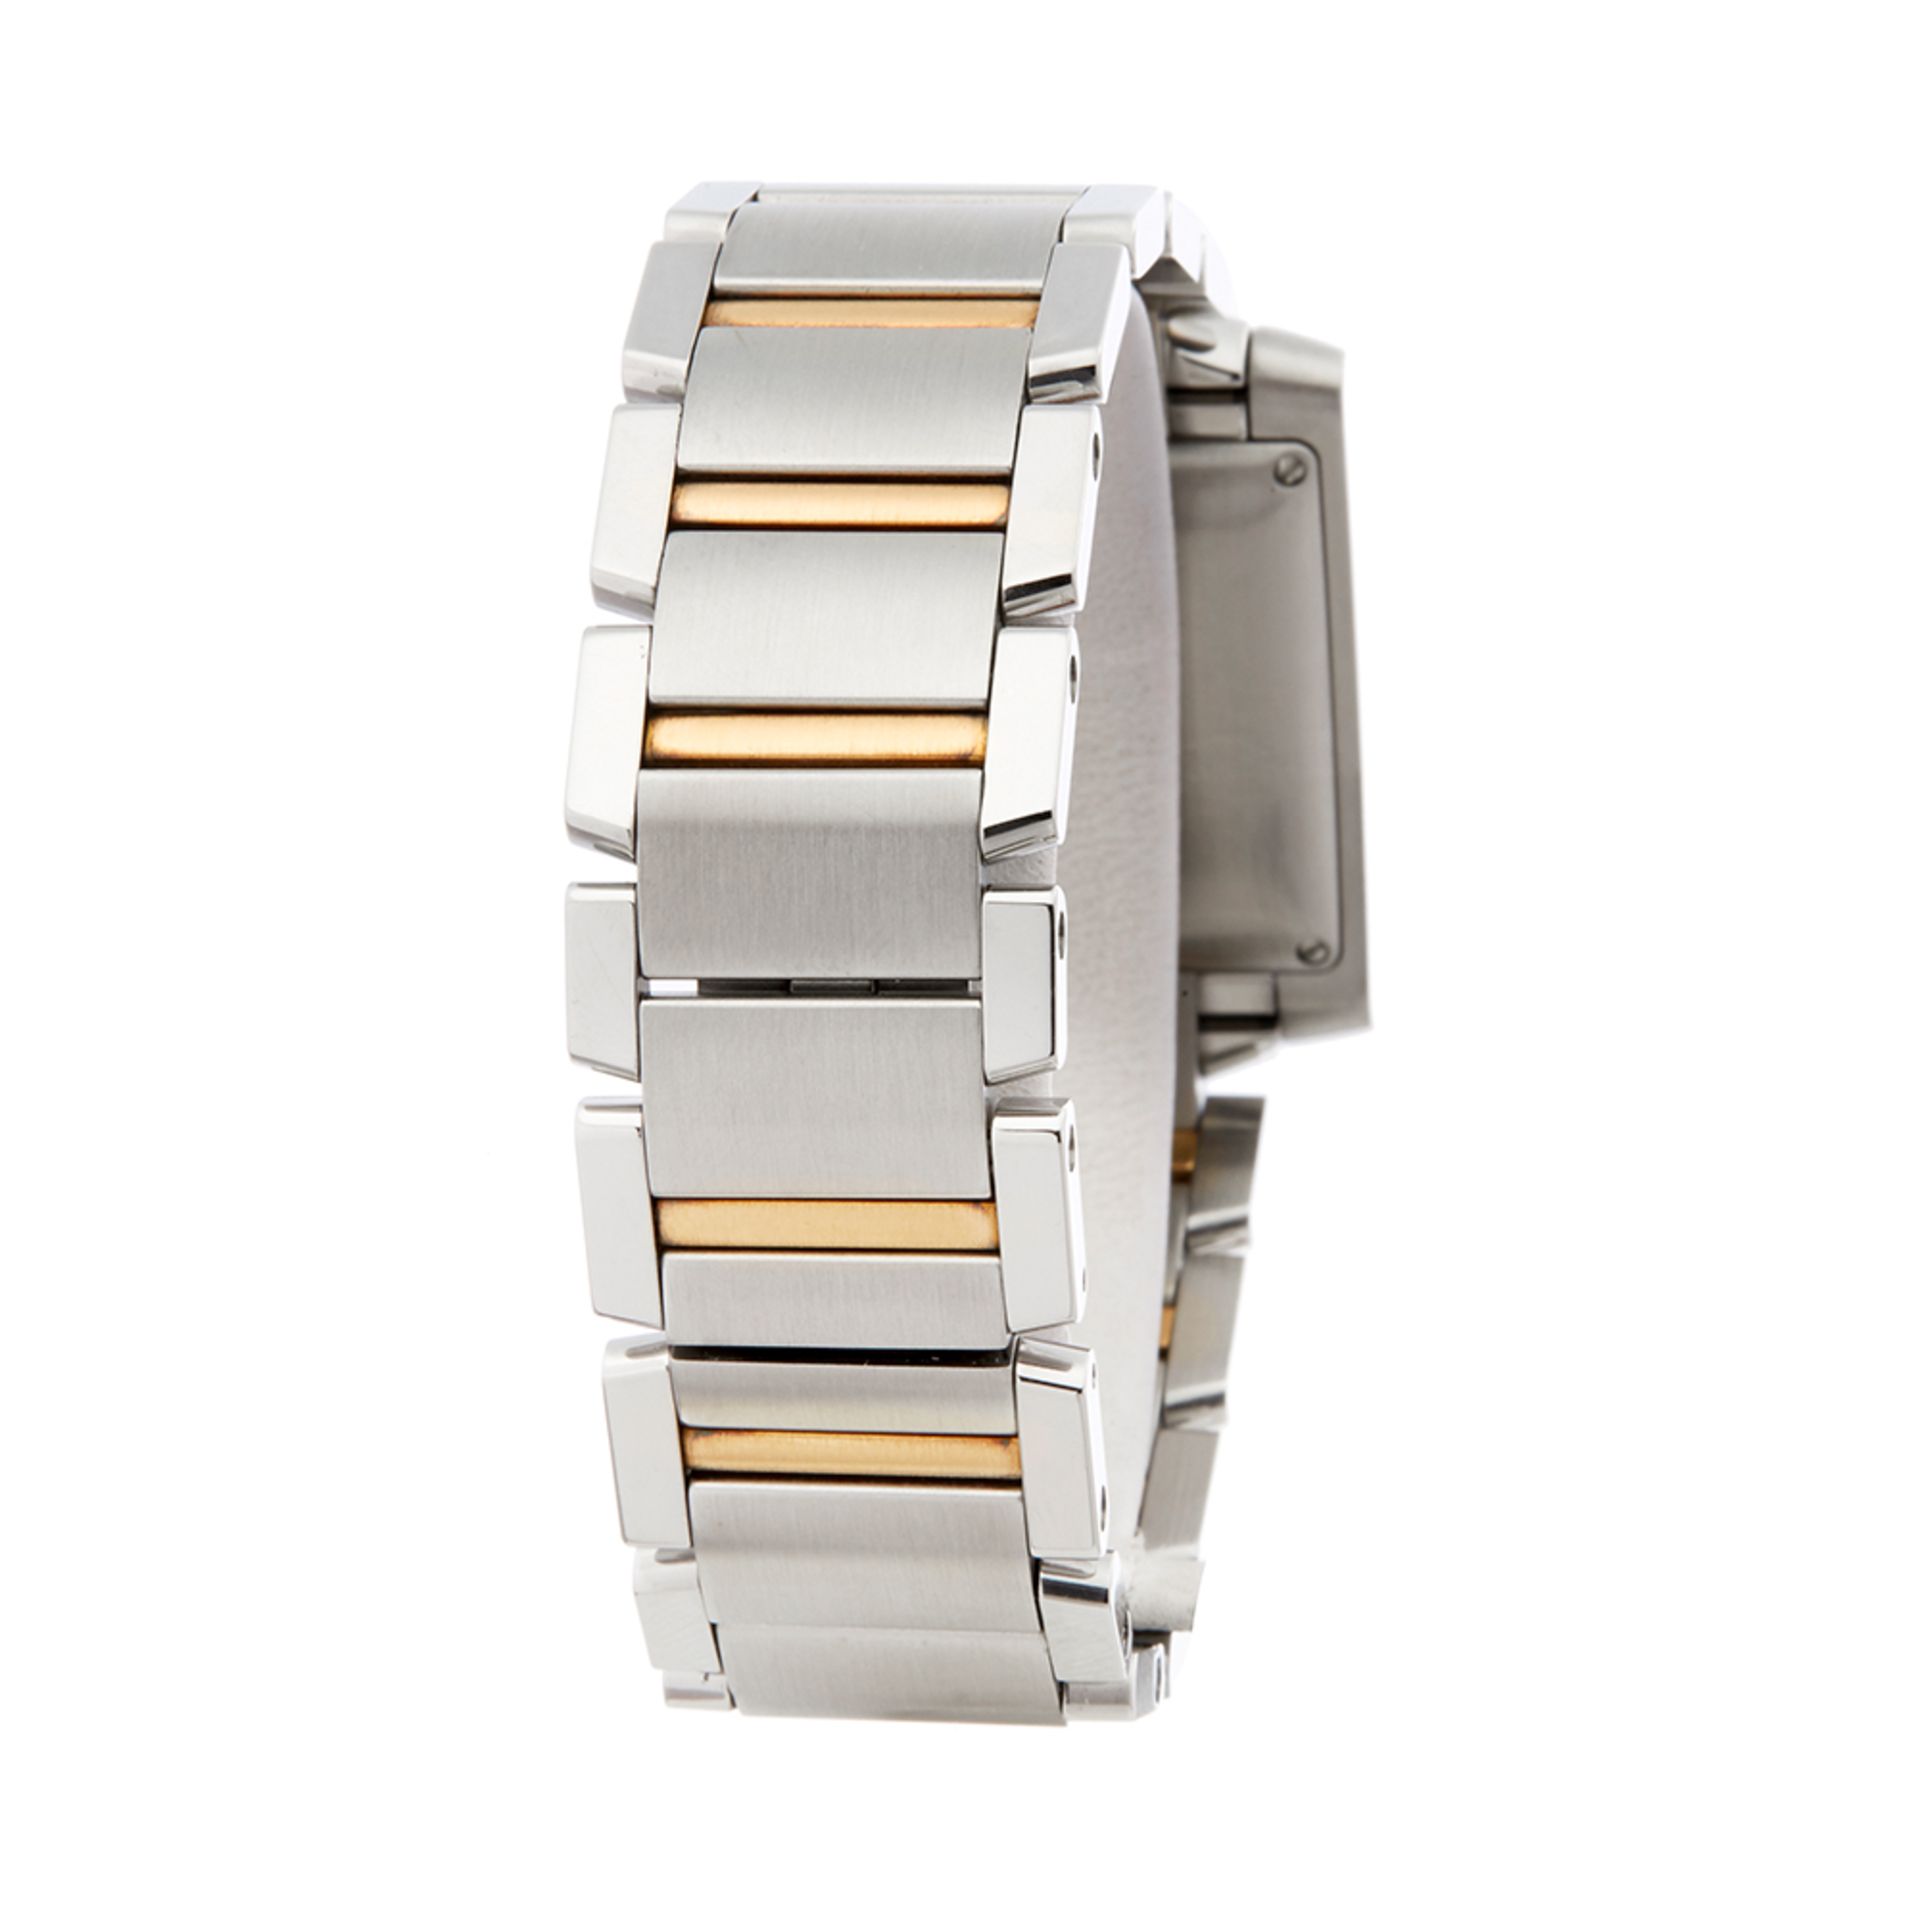 Cartier Tank Francaise Stainless Steel & 18K Yellow Gold - W51005Q4 - Image 6 of 8